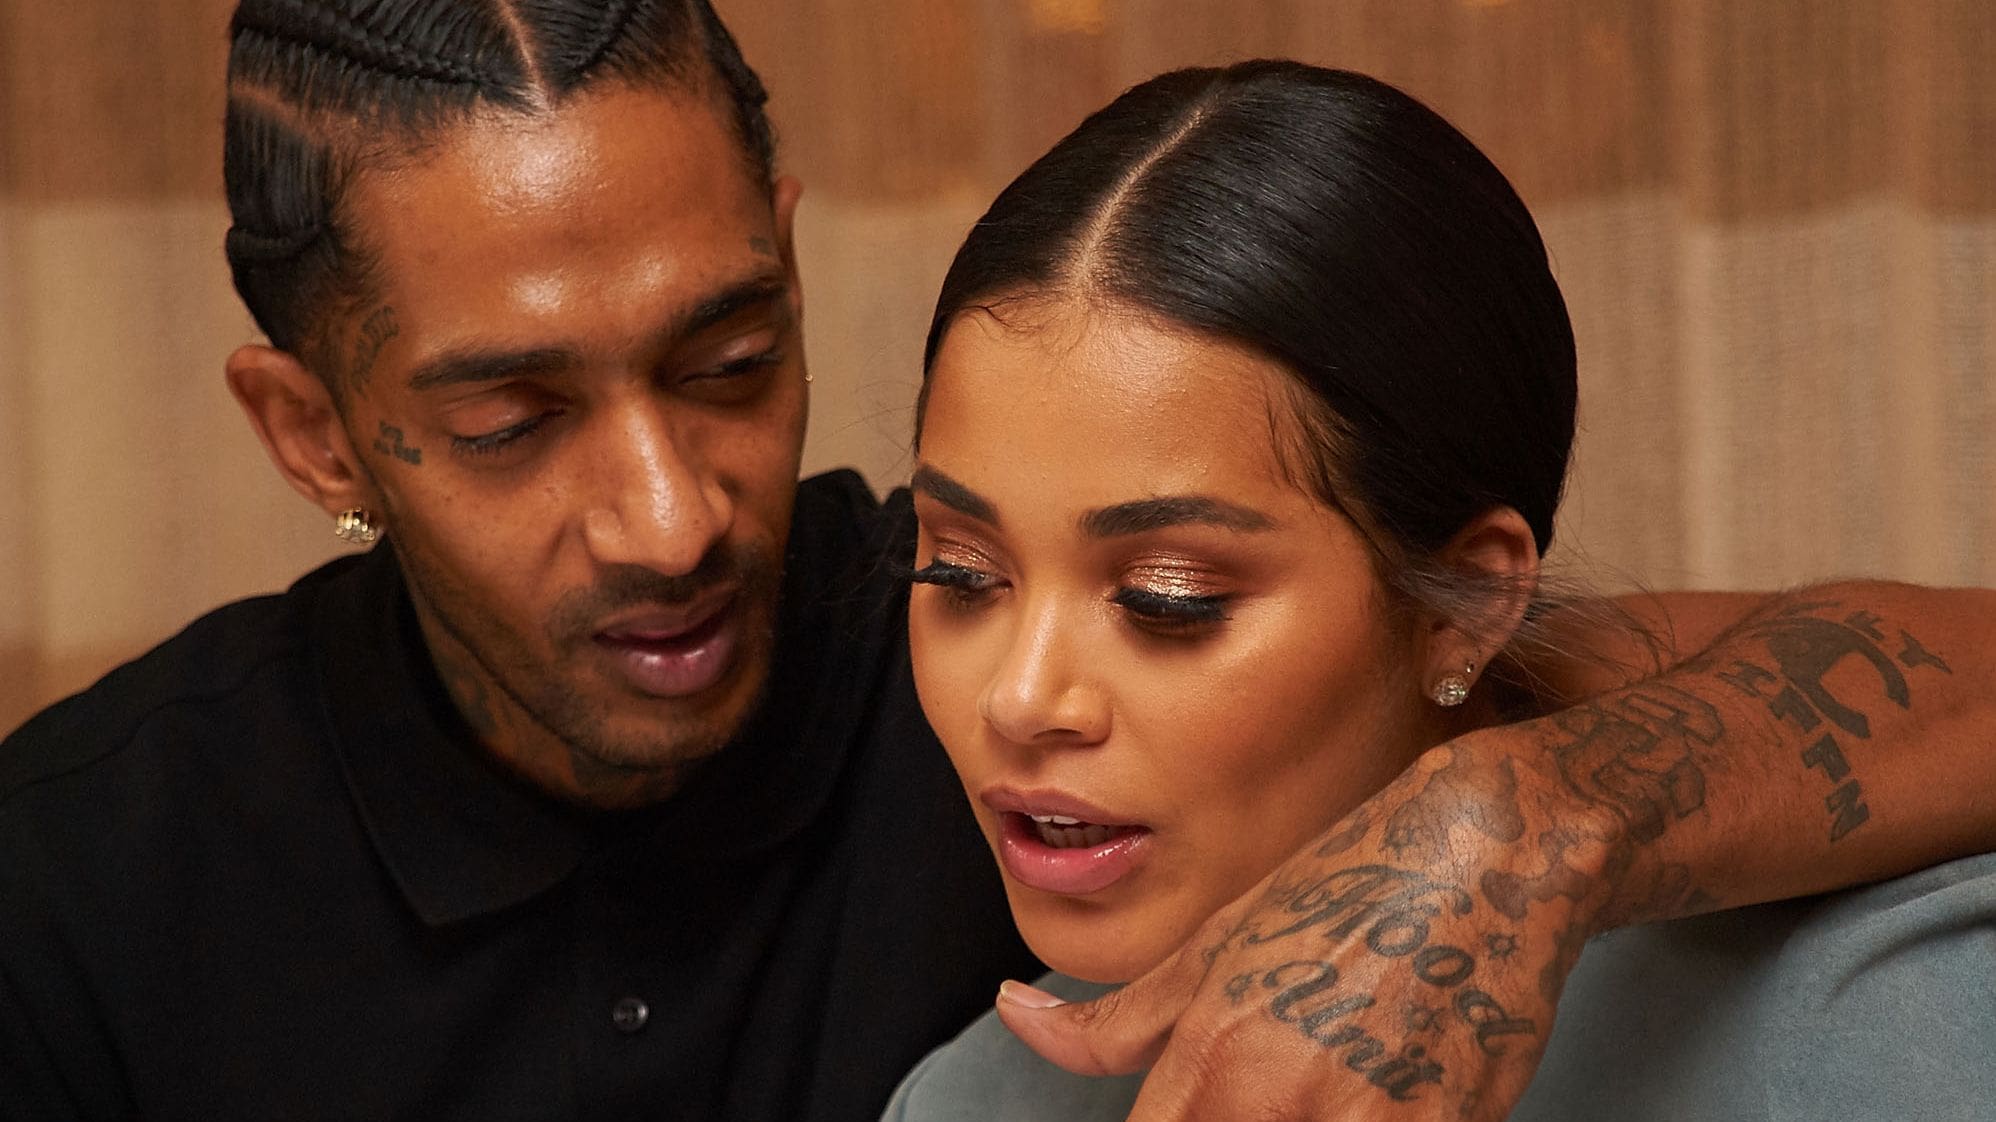 Lauren London Signs Off on Nipsey Hussle’s Brother’s Final Accounting Report in Court, Son Kross Set to Receive $5 Million+